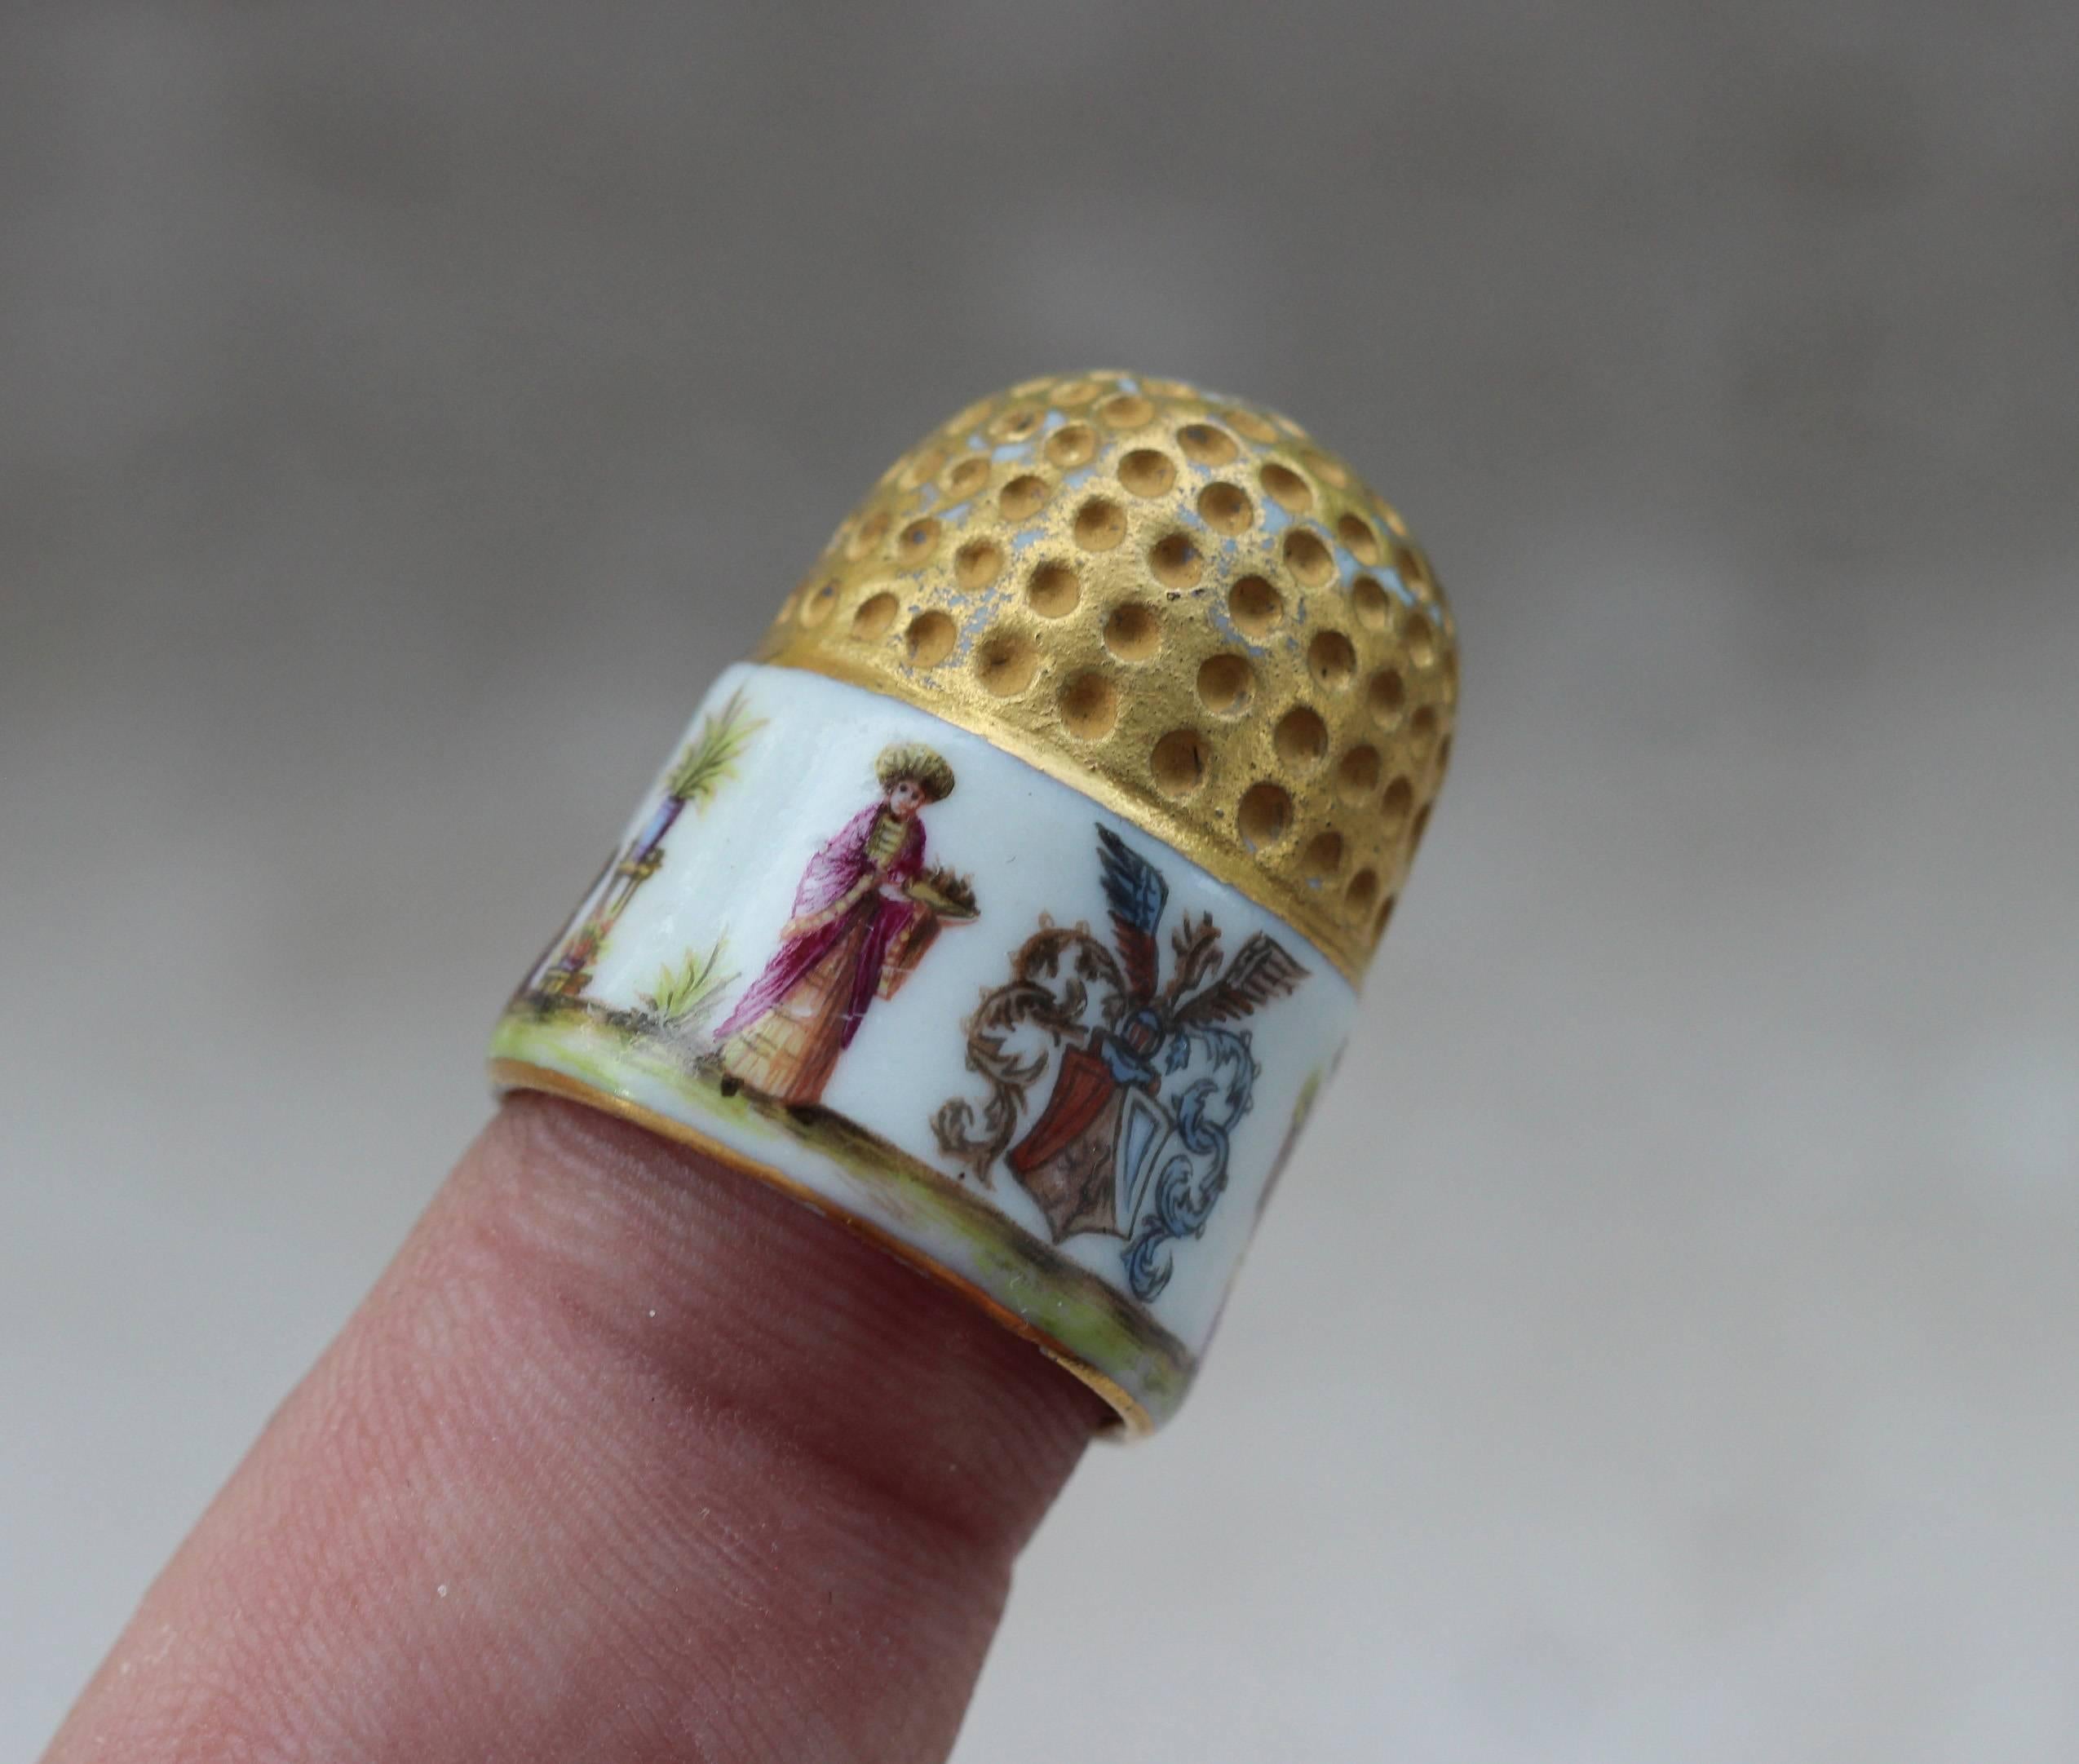 Mid-18th Century Meissen Porcelain Thimble with Chinoiserie Scenes, circa 1735-1740